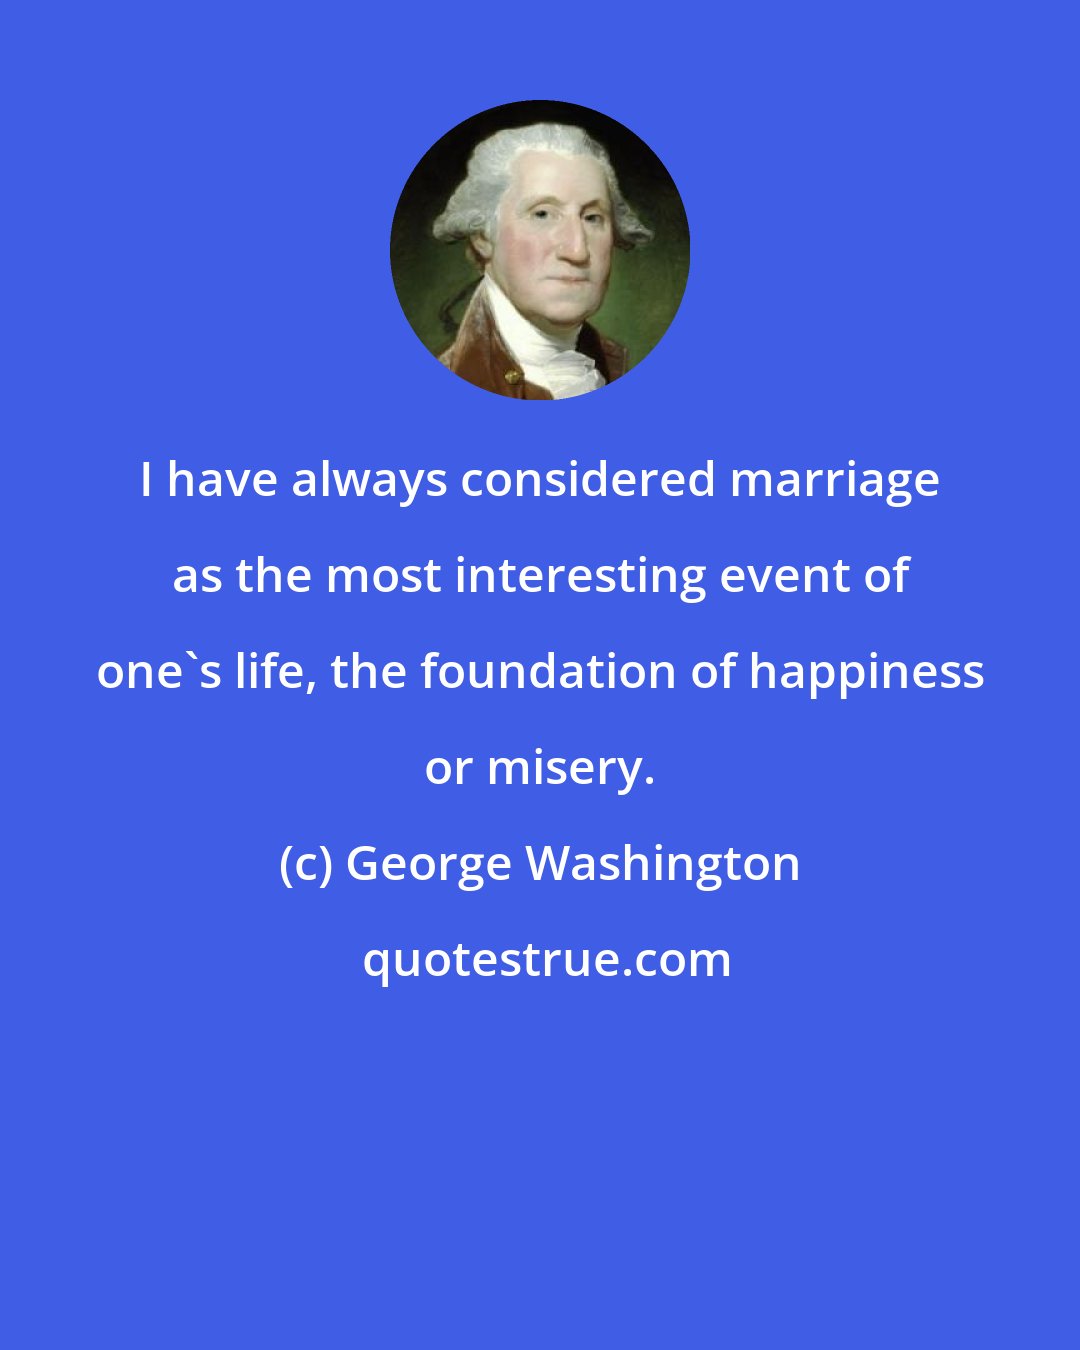 George Washington: I have always considered marriage as the most interesting event of one's life, the foundation of happiness or misery.